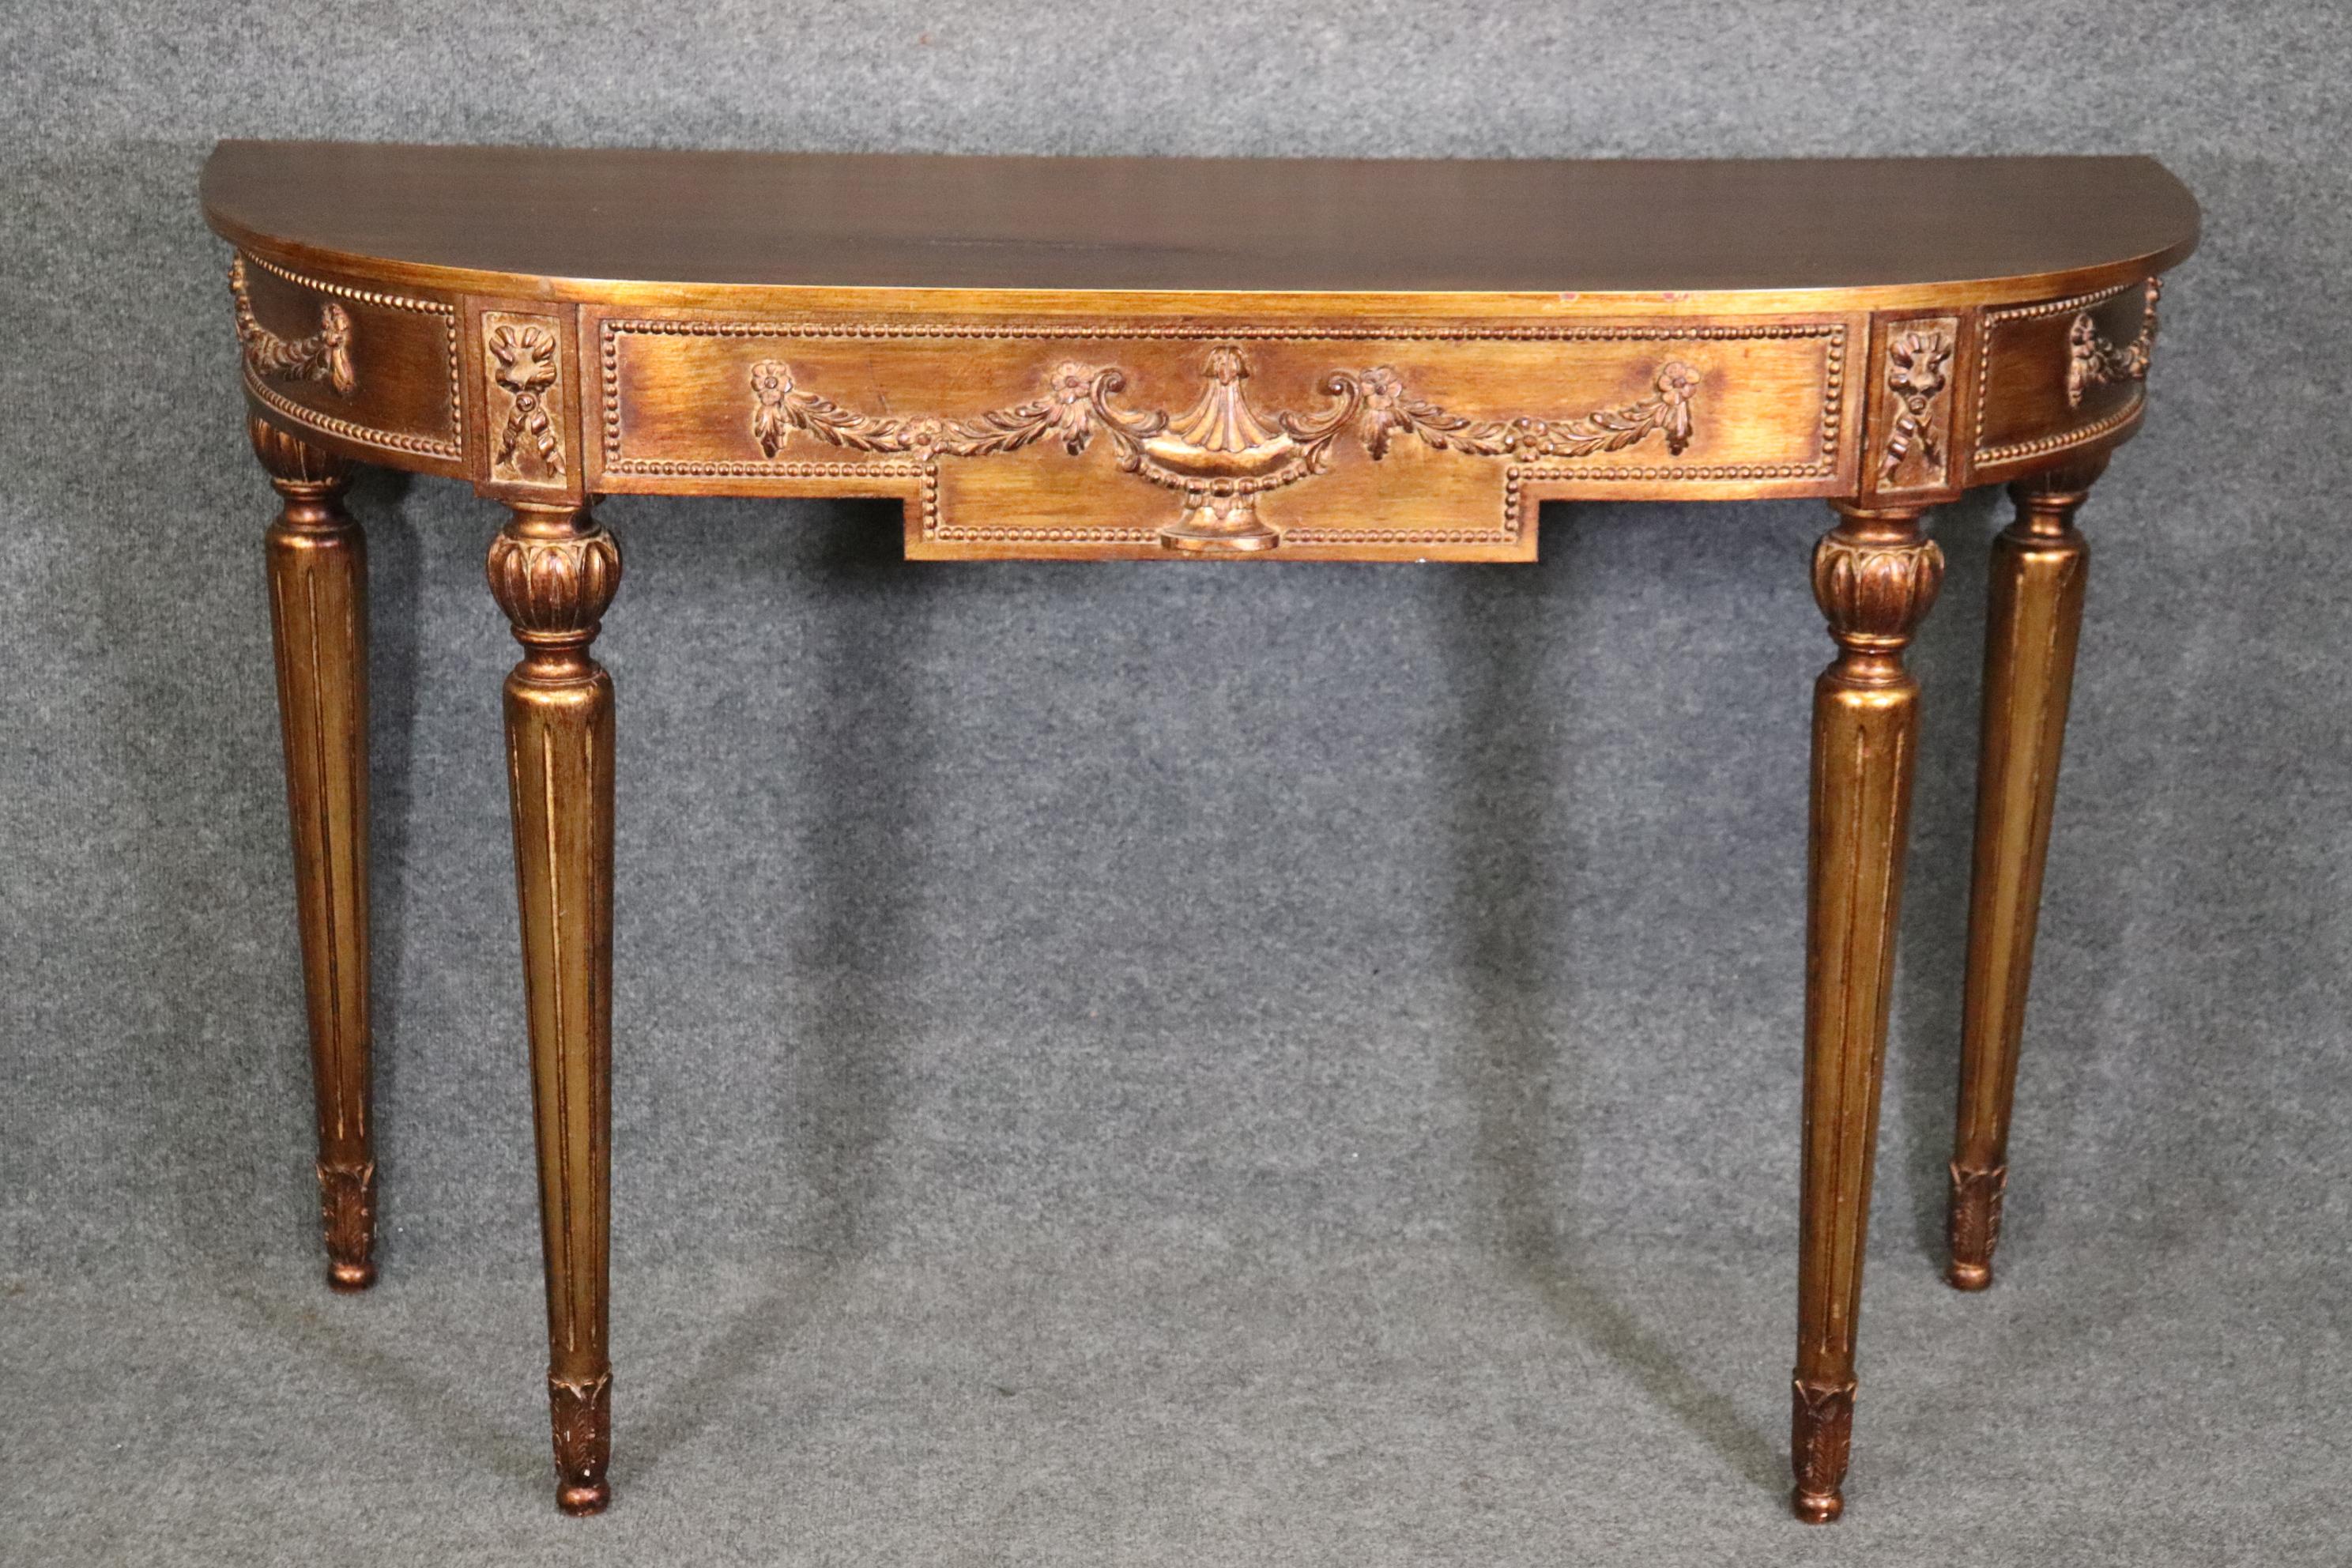 Dimensions- H: 34 3/4in W: 54in D: 18 1/2in 
This Louis XVI Style Gold Gilt Demilune Console Table is a perfect addition to your home or place of choosing and will certainly bring a sense of luxury along with it! This piece is equipped with a